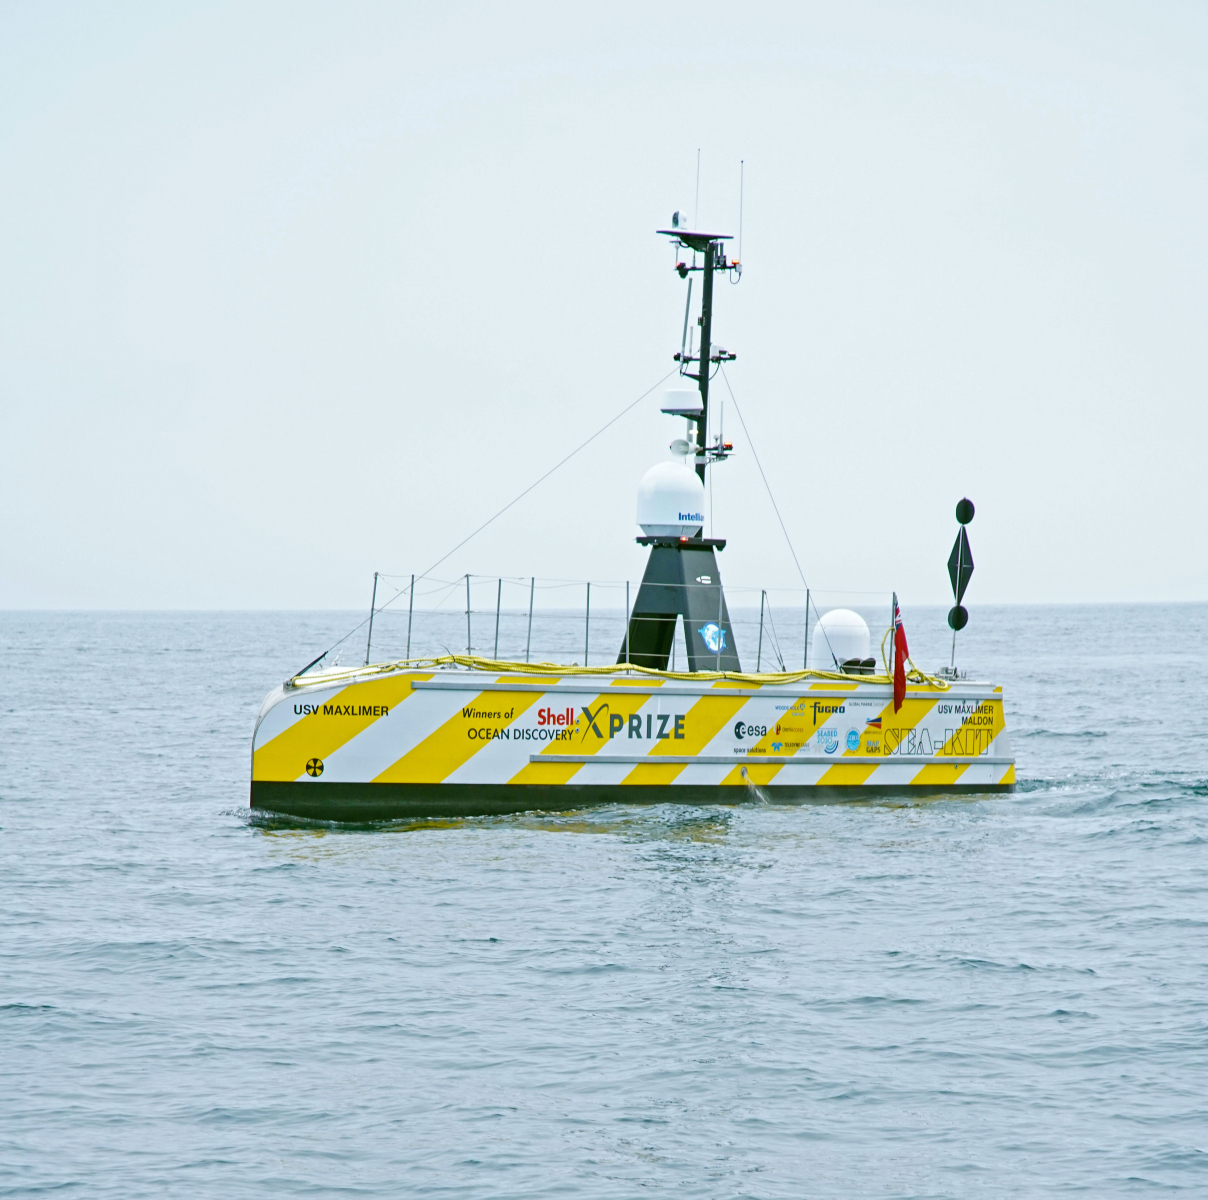 The multibeam data collected during the project was shared with The Nippon Foundation-GEBCO Seabed2030 project helping to contribute to their goals of mapping the oceans by 2030.  (Image credit: Rich Edwards, ENP Media)